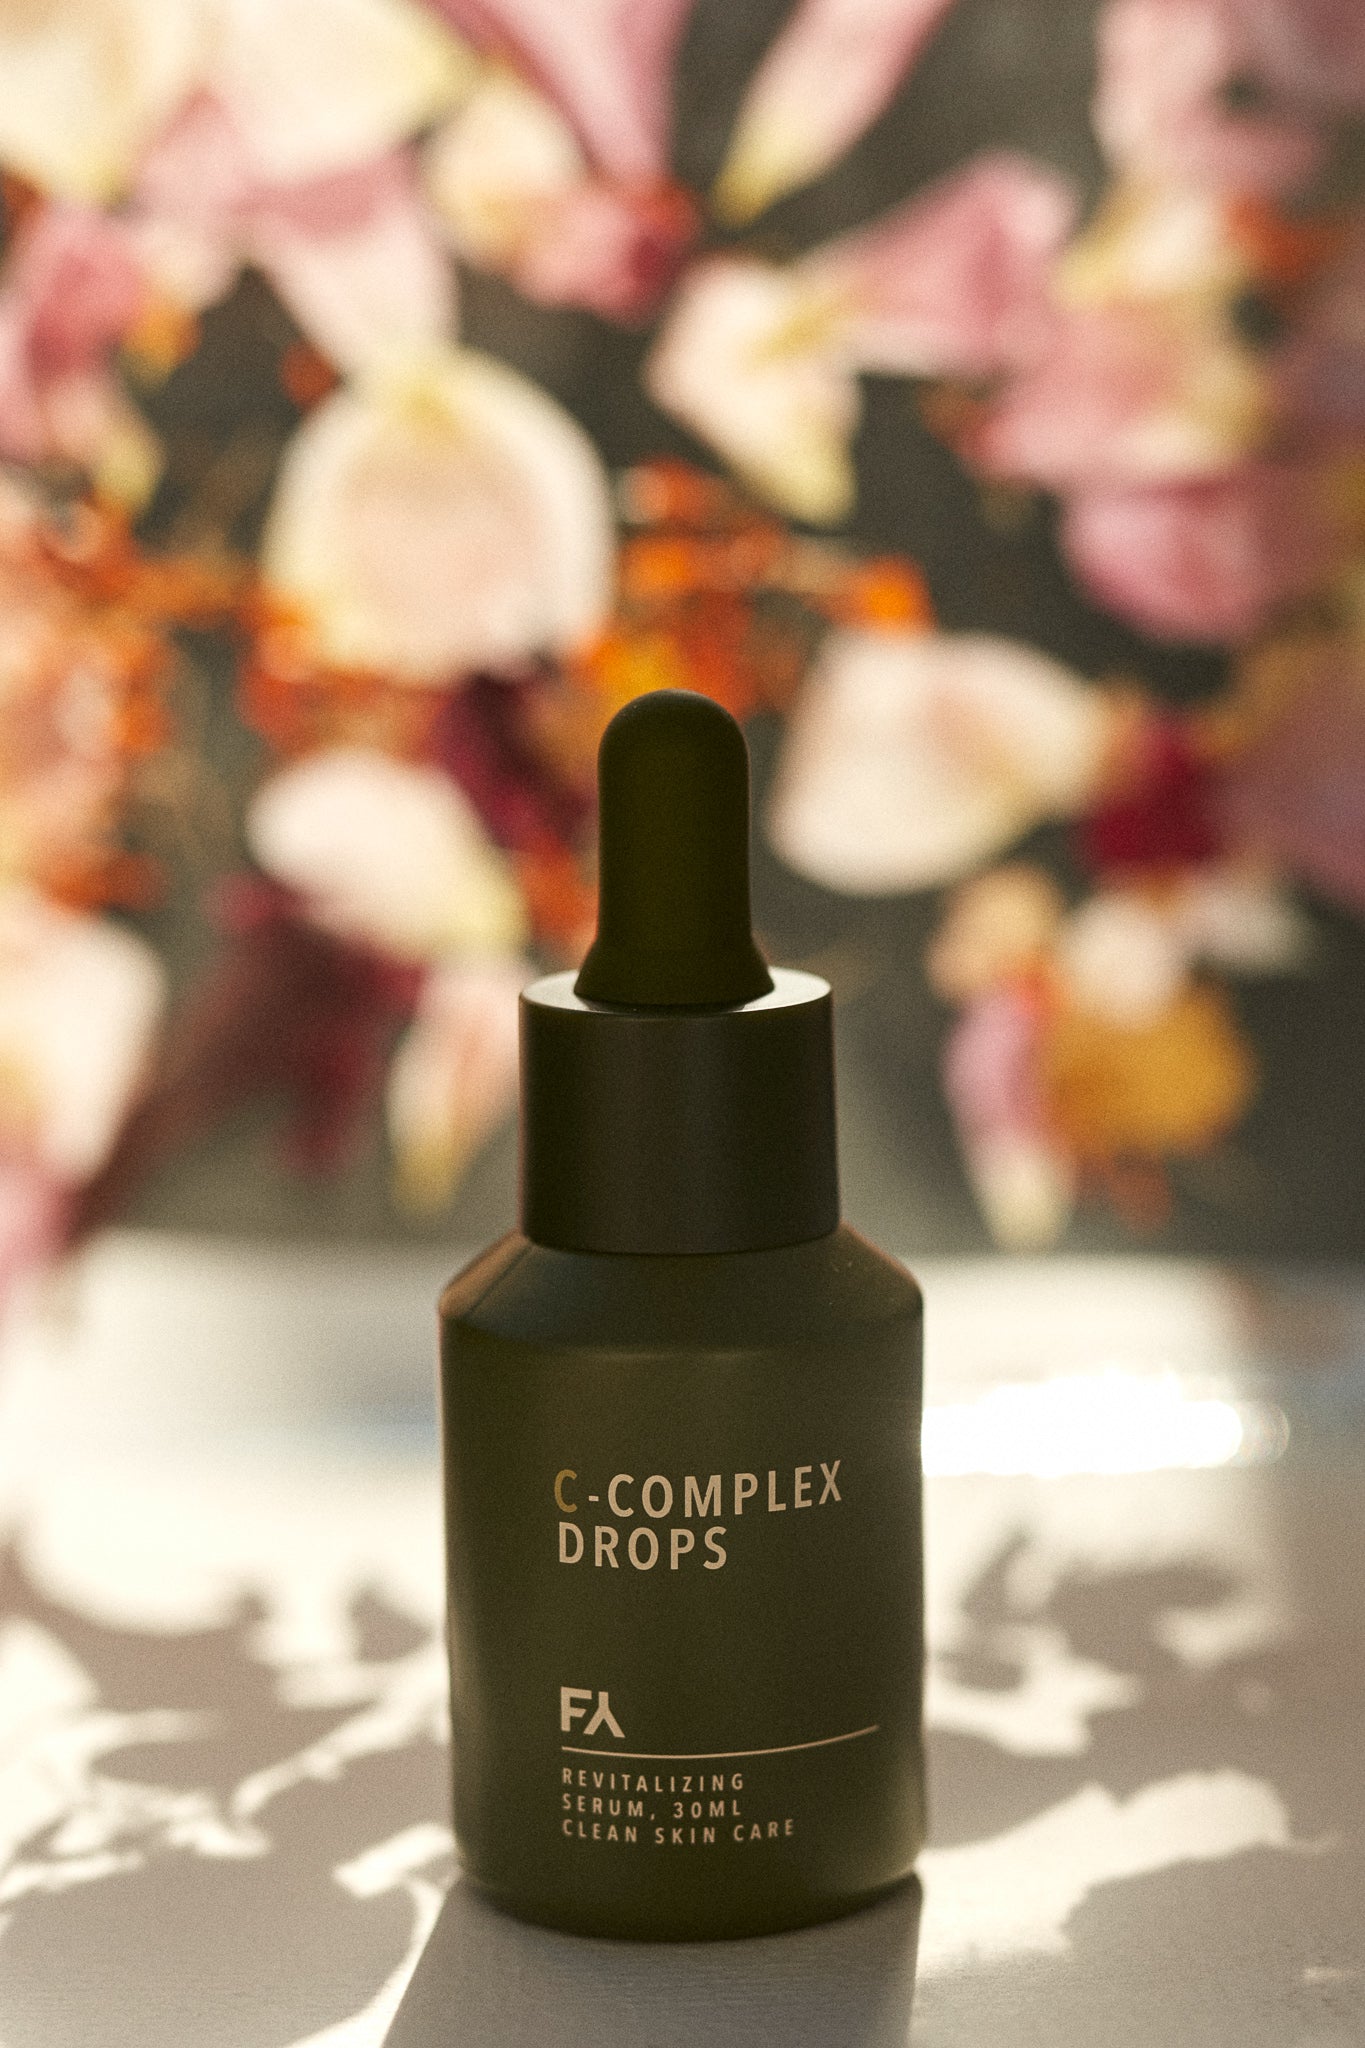 Campaign shot of the C-Complex Drops Revitalizing Serum by Fields of Yarrow with flowers in the background